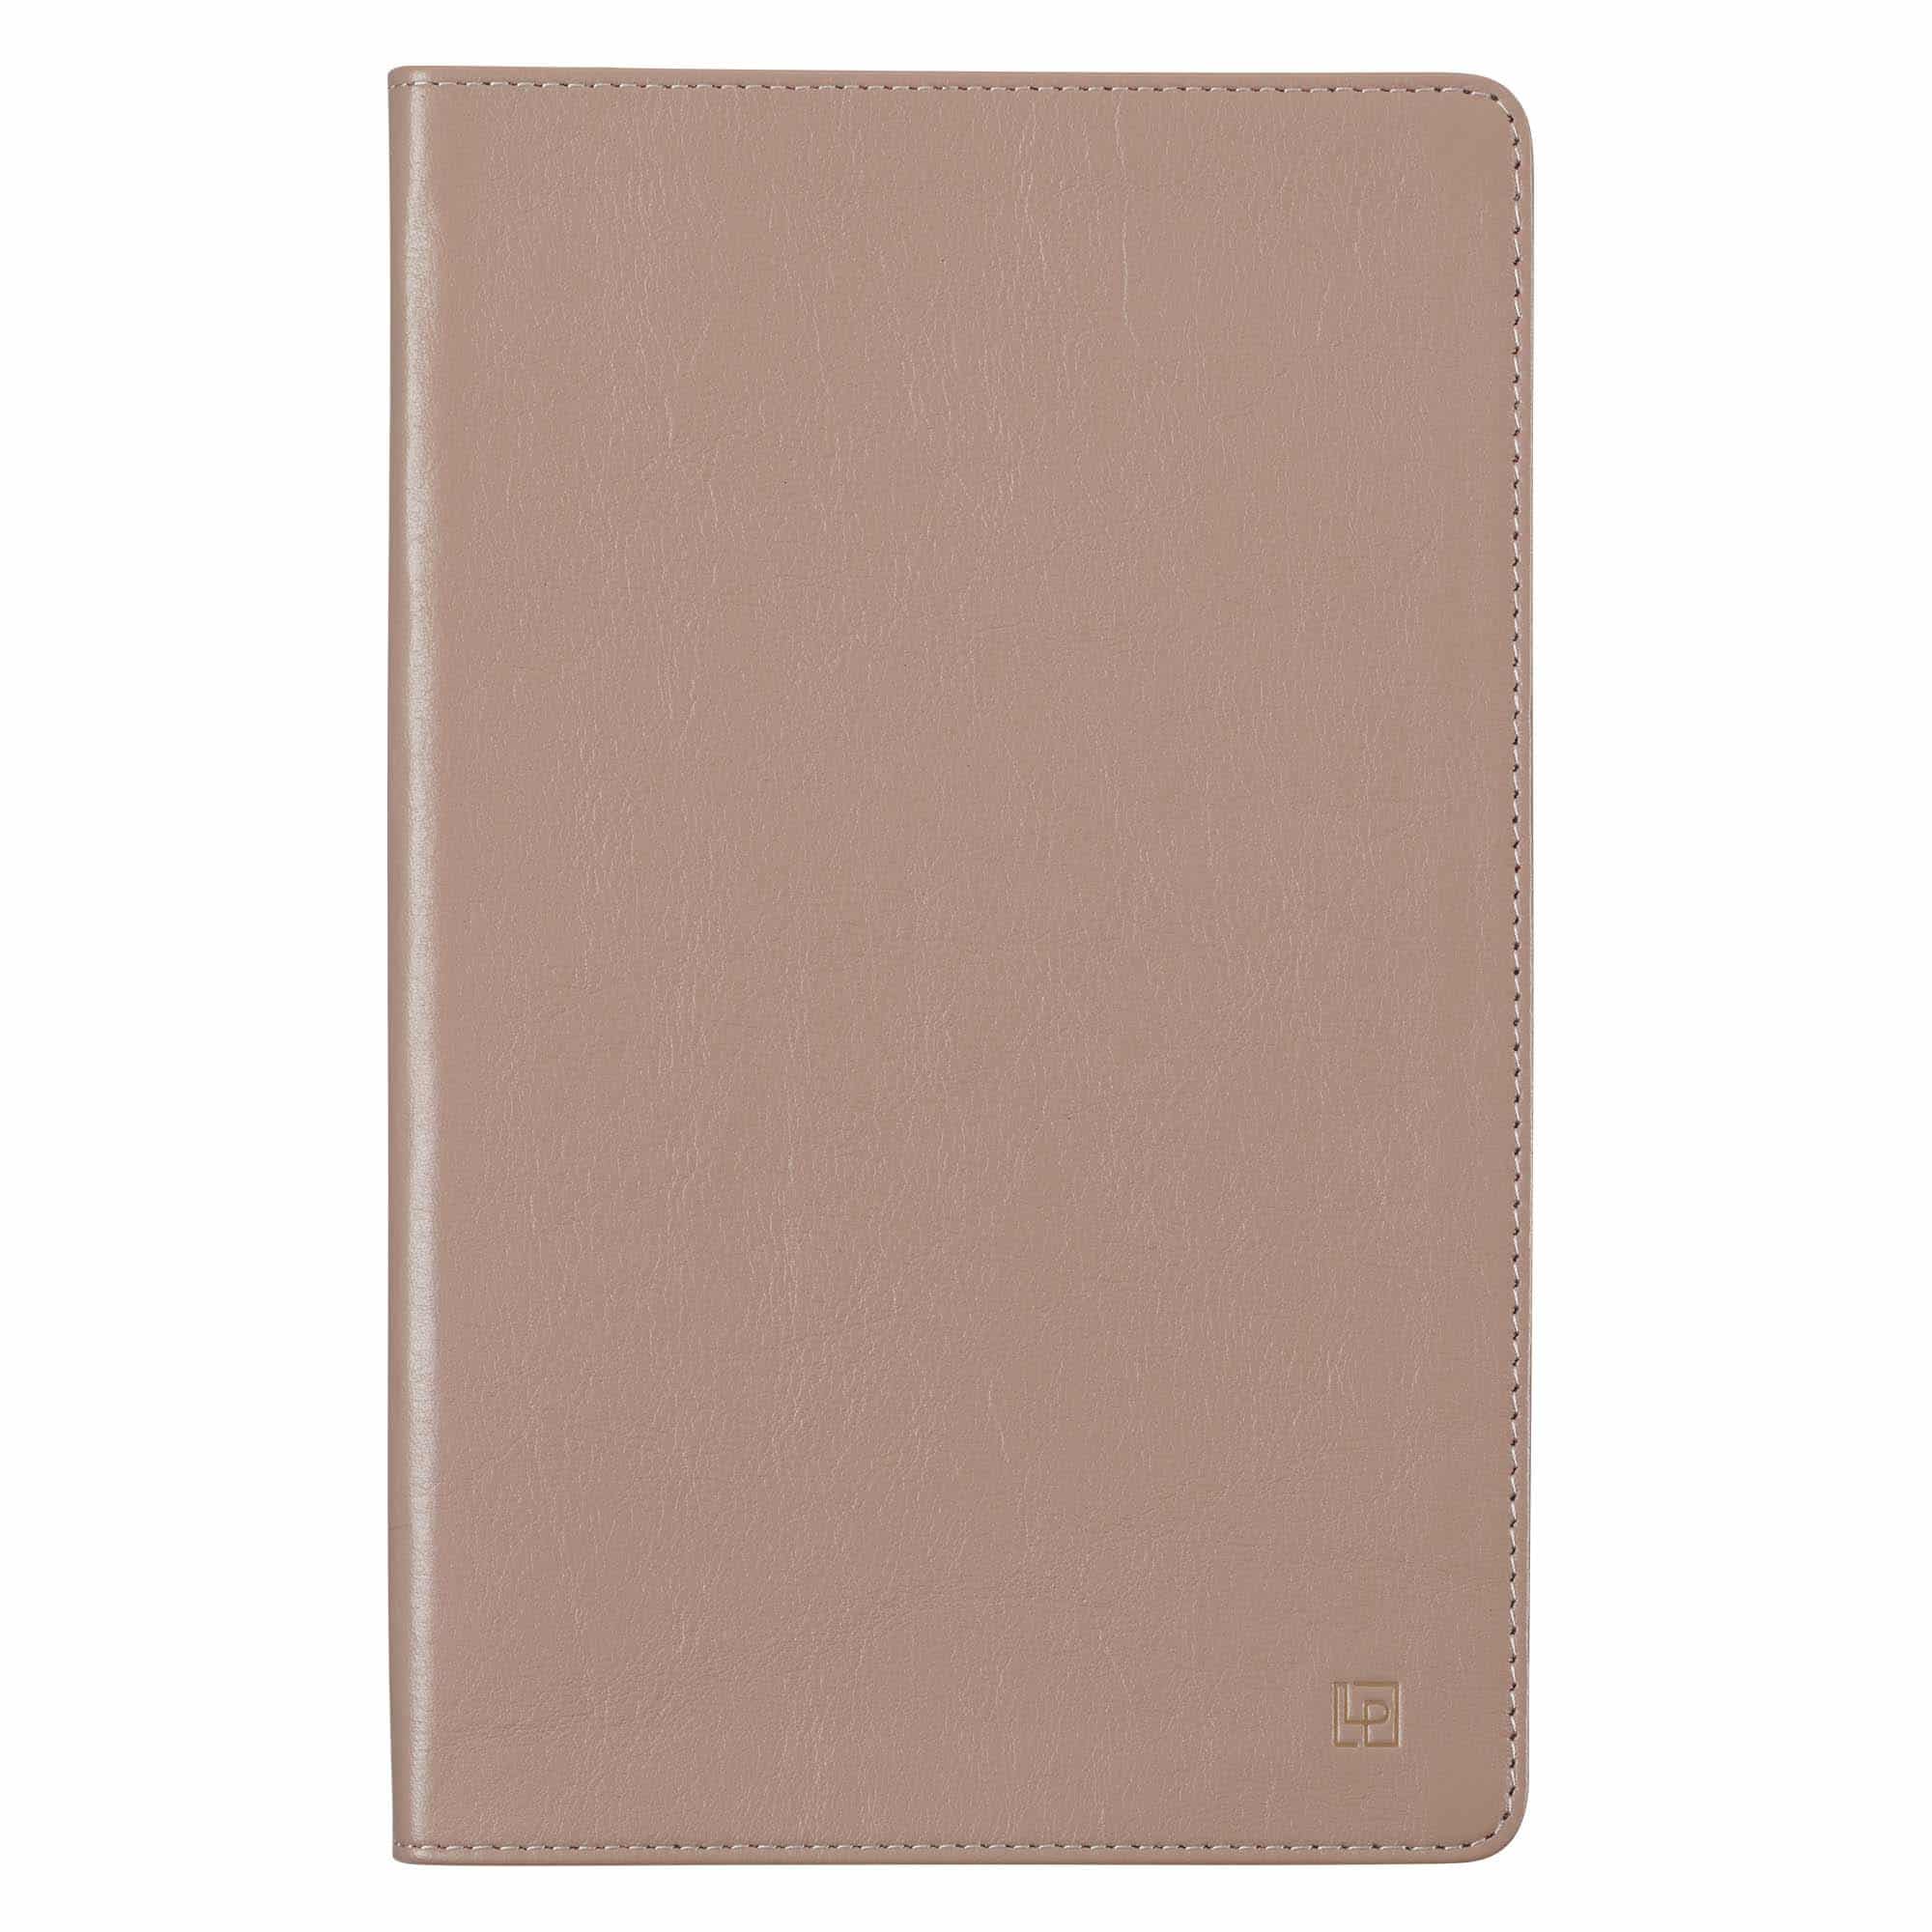 Oyster Gray Leather Journal